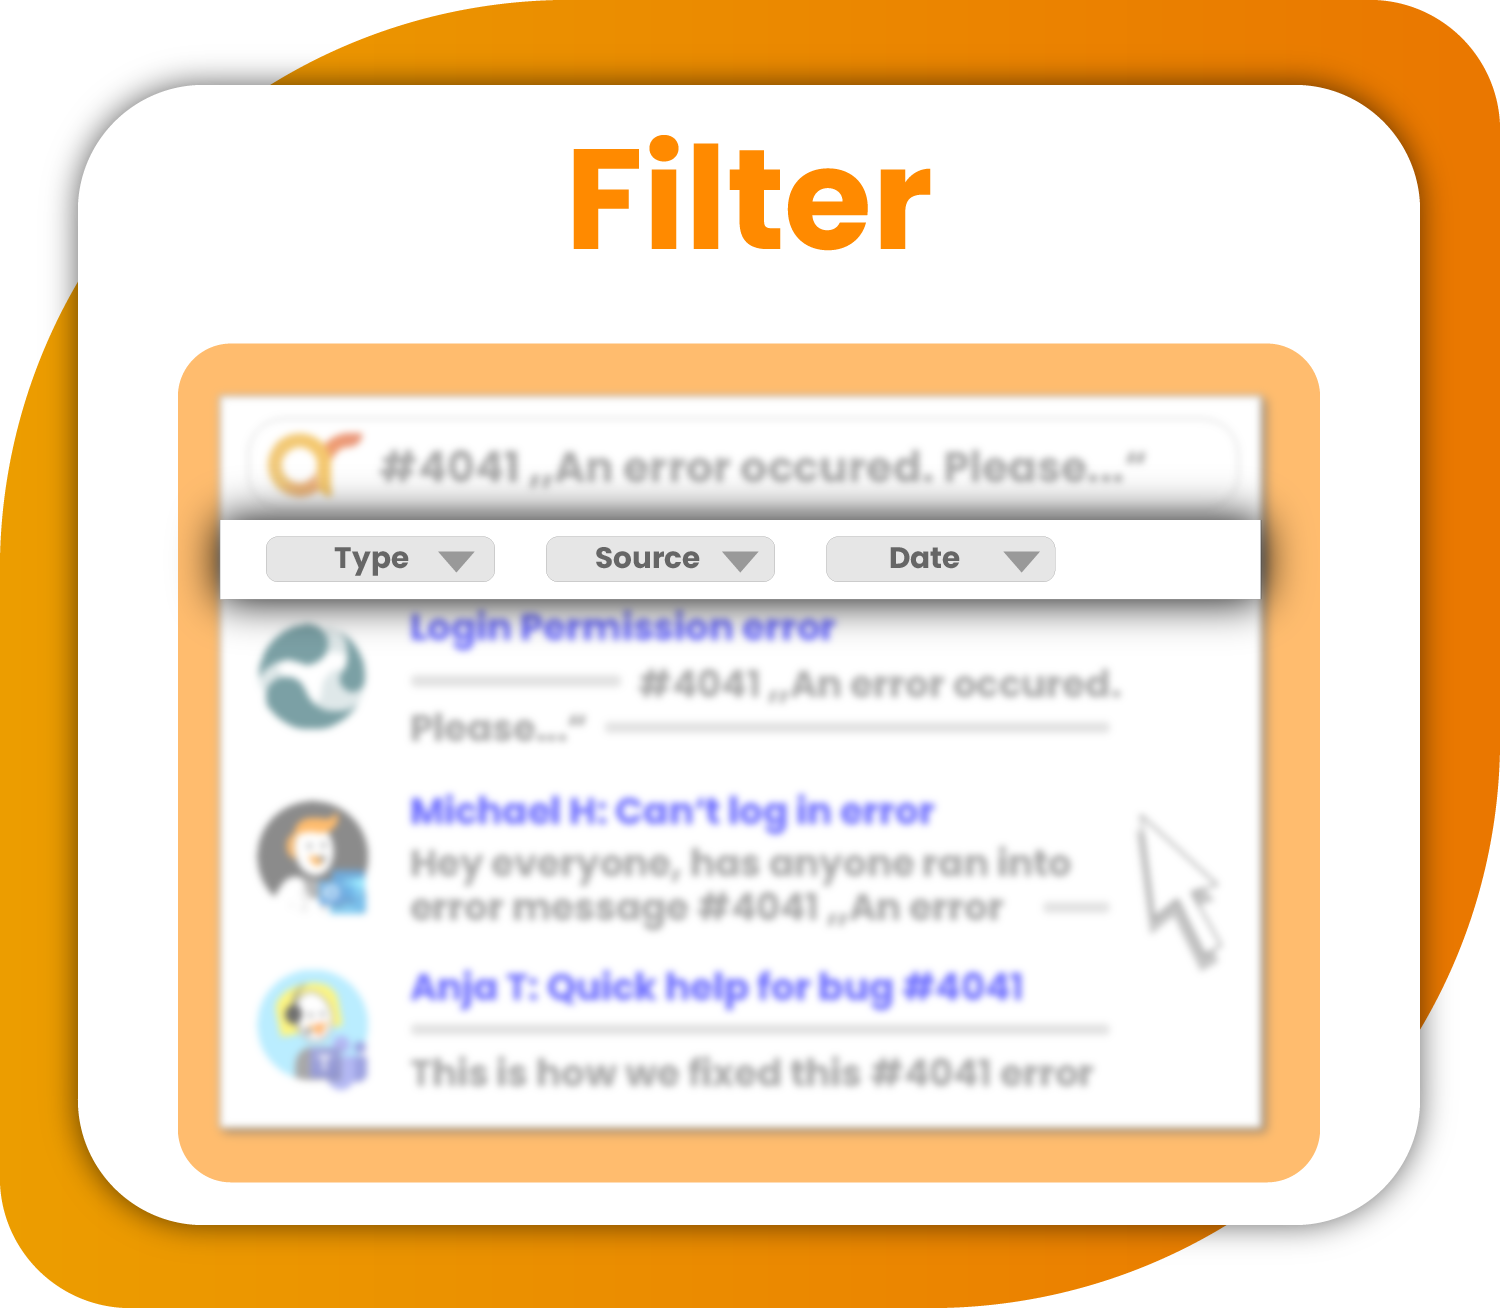 Filter images based on type, source, date and more